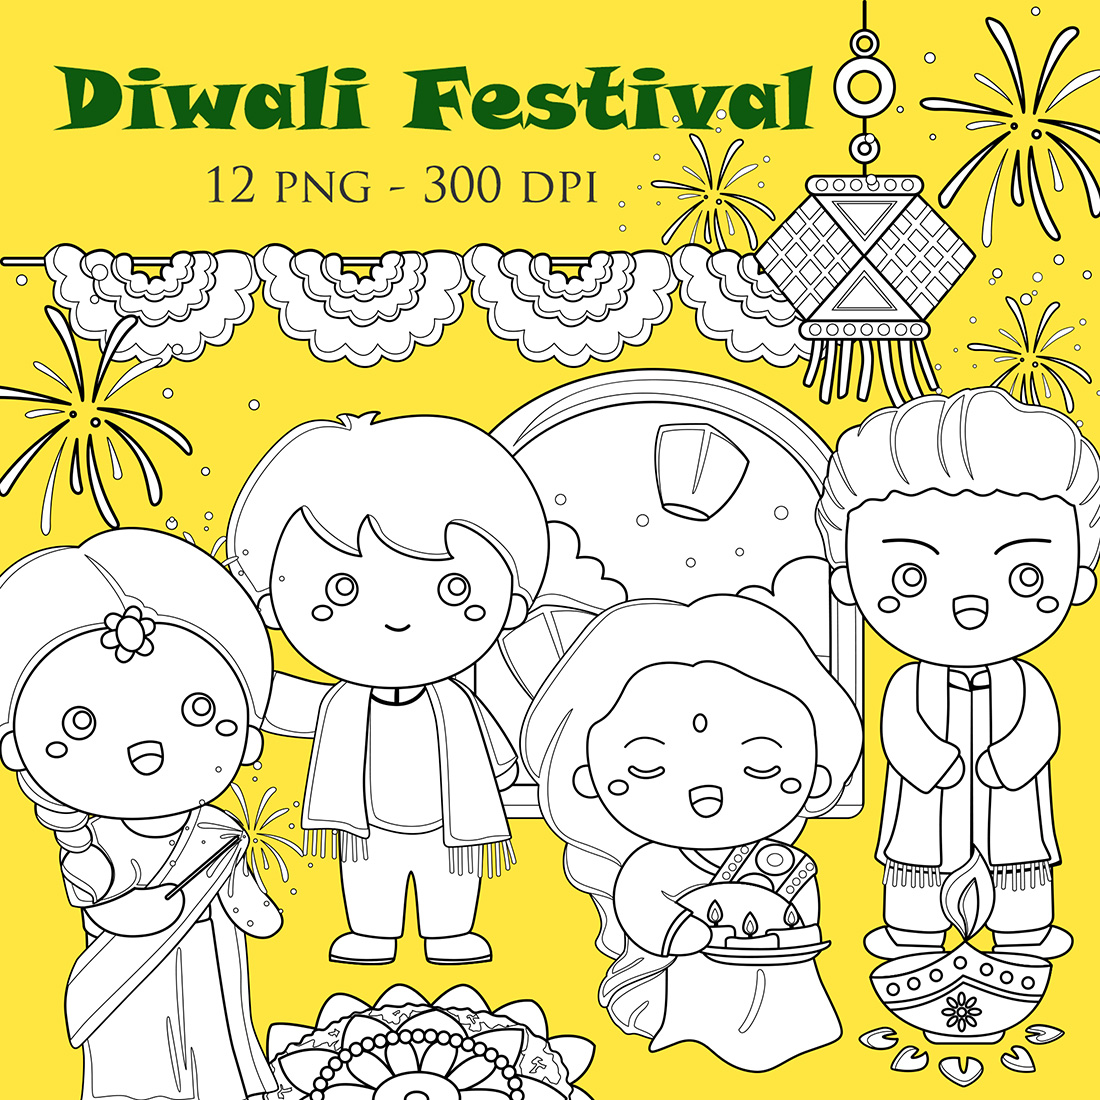 Search Result :diwali-drawing-competition